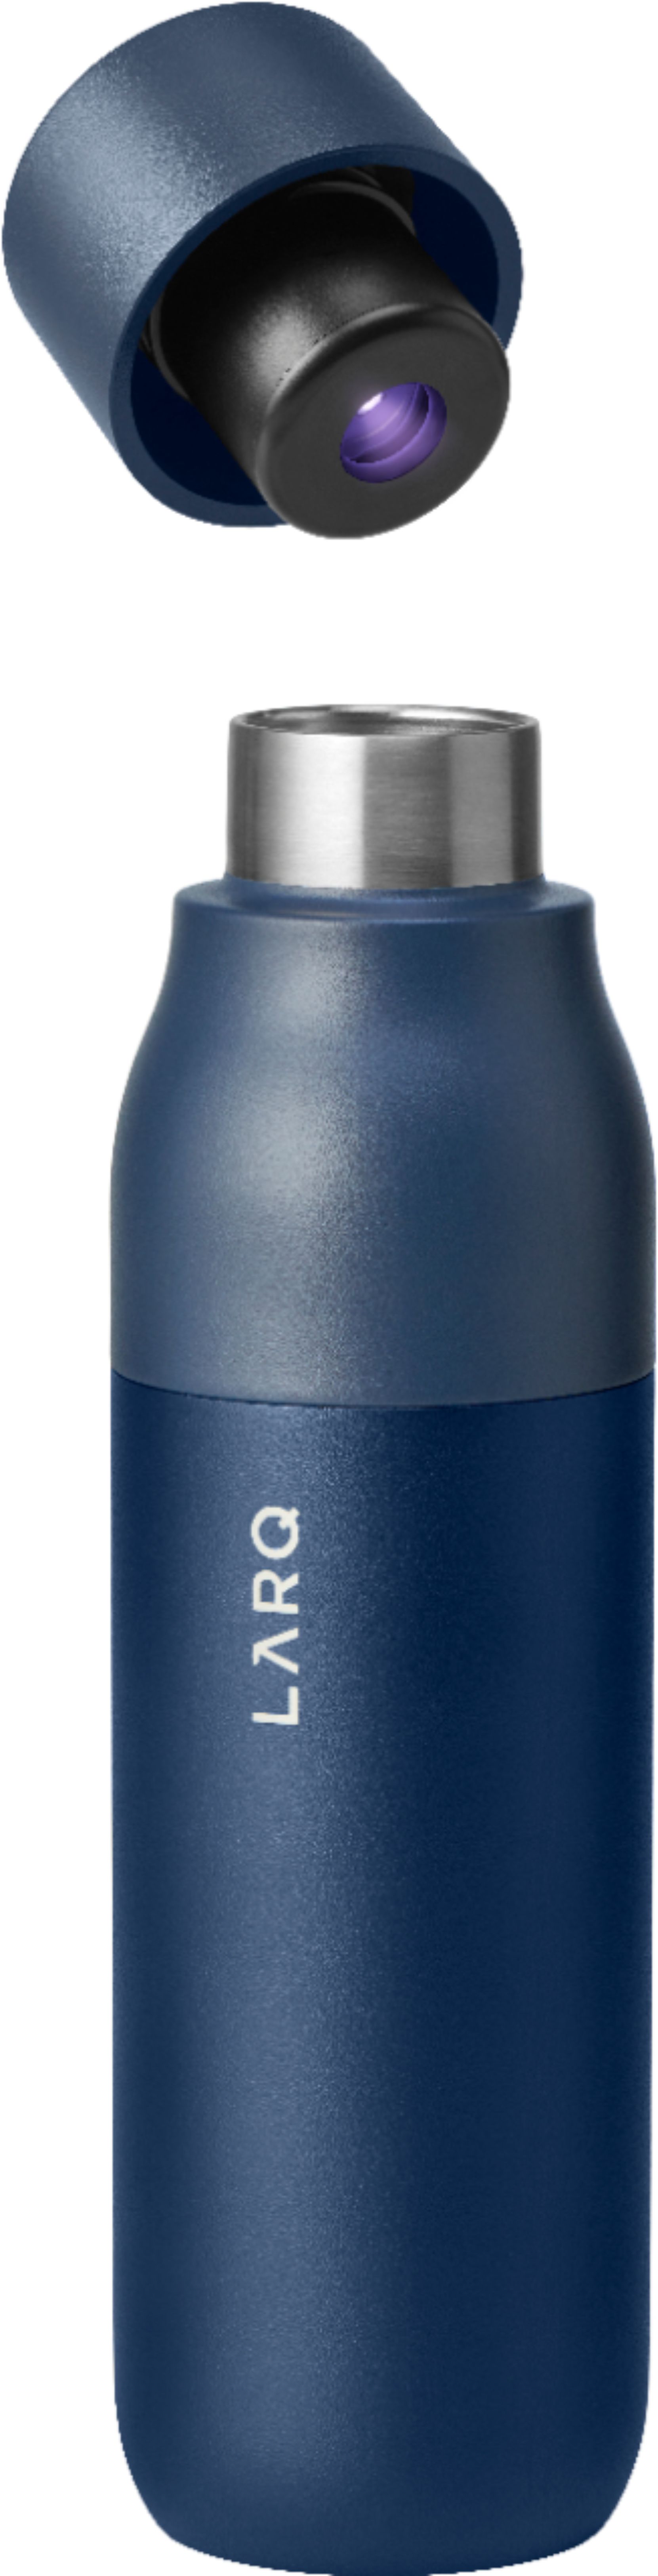 LARQ Bottle Twist Top 17oz - Insulated Stainless Steel Water Bottle |  Thermos, BPA Free | Reusable Water Bottle for Camping, Office, and Travel |  Keep